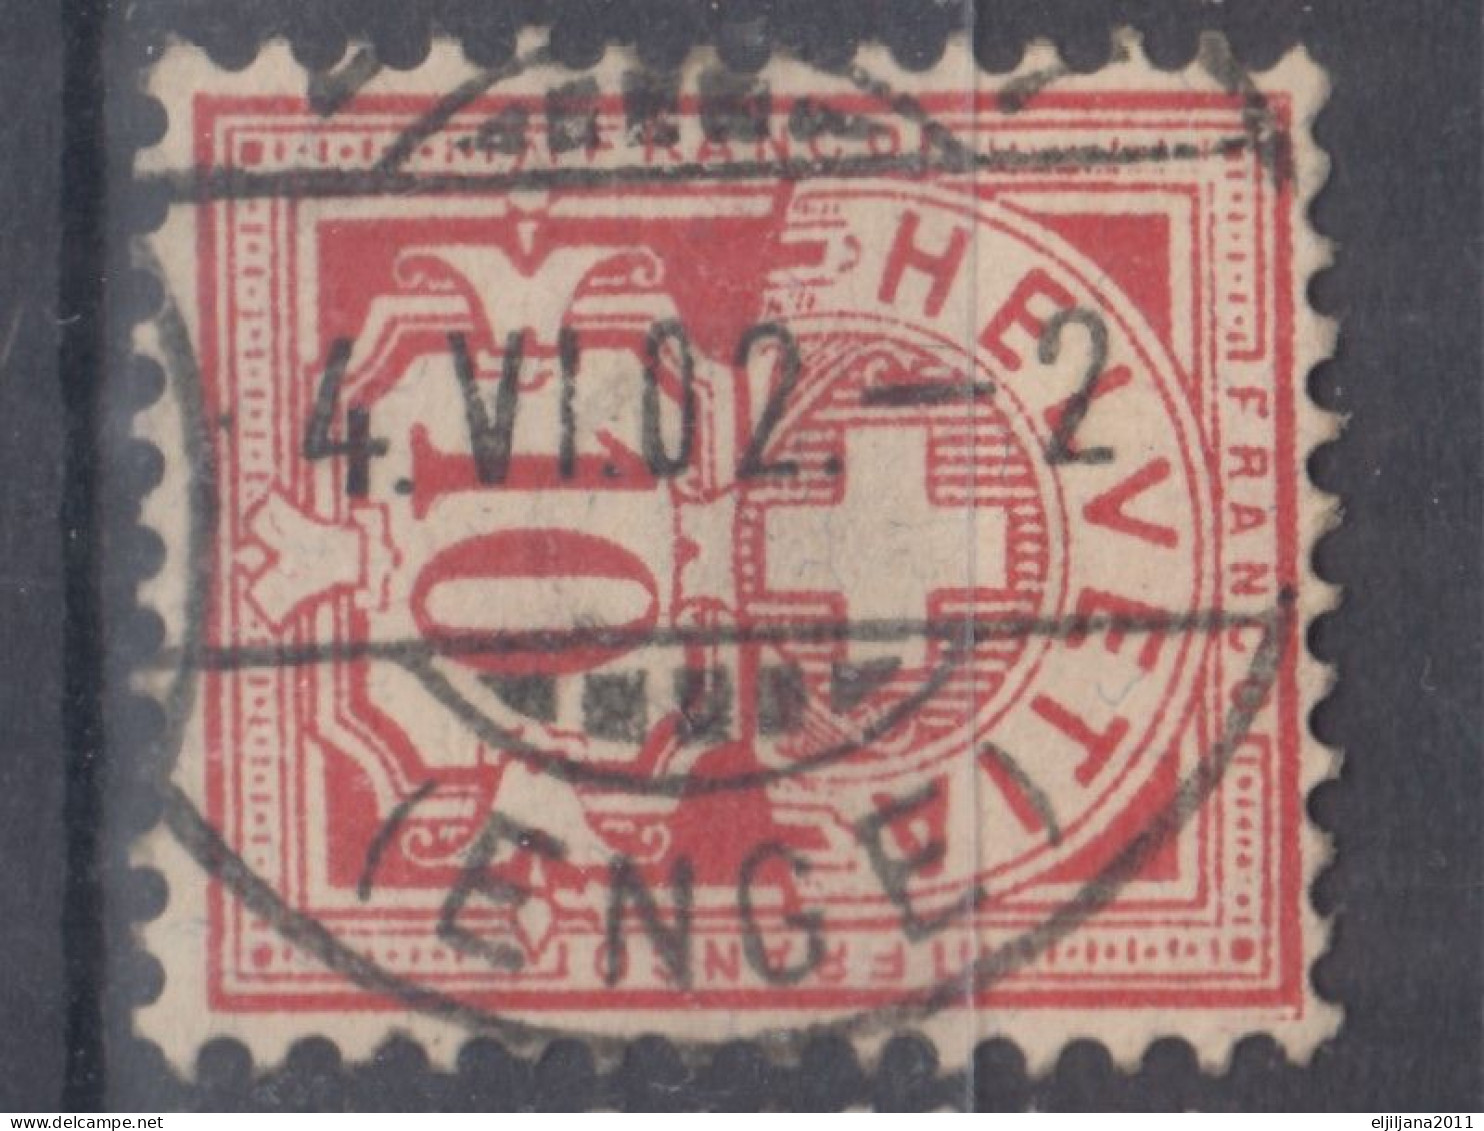 ⁕ Switzerland 1882 - 1906 ⁕ Cross over value 10 c. red ⁕ 42v used ( shades - unchecked) - see postmark